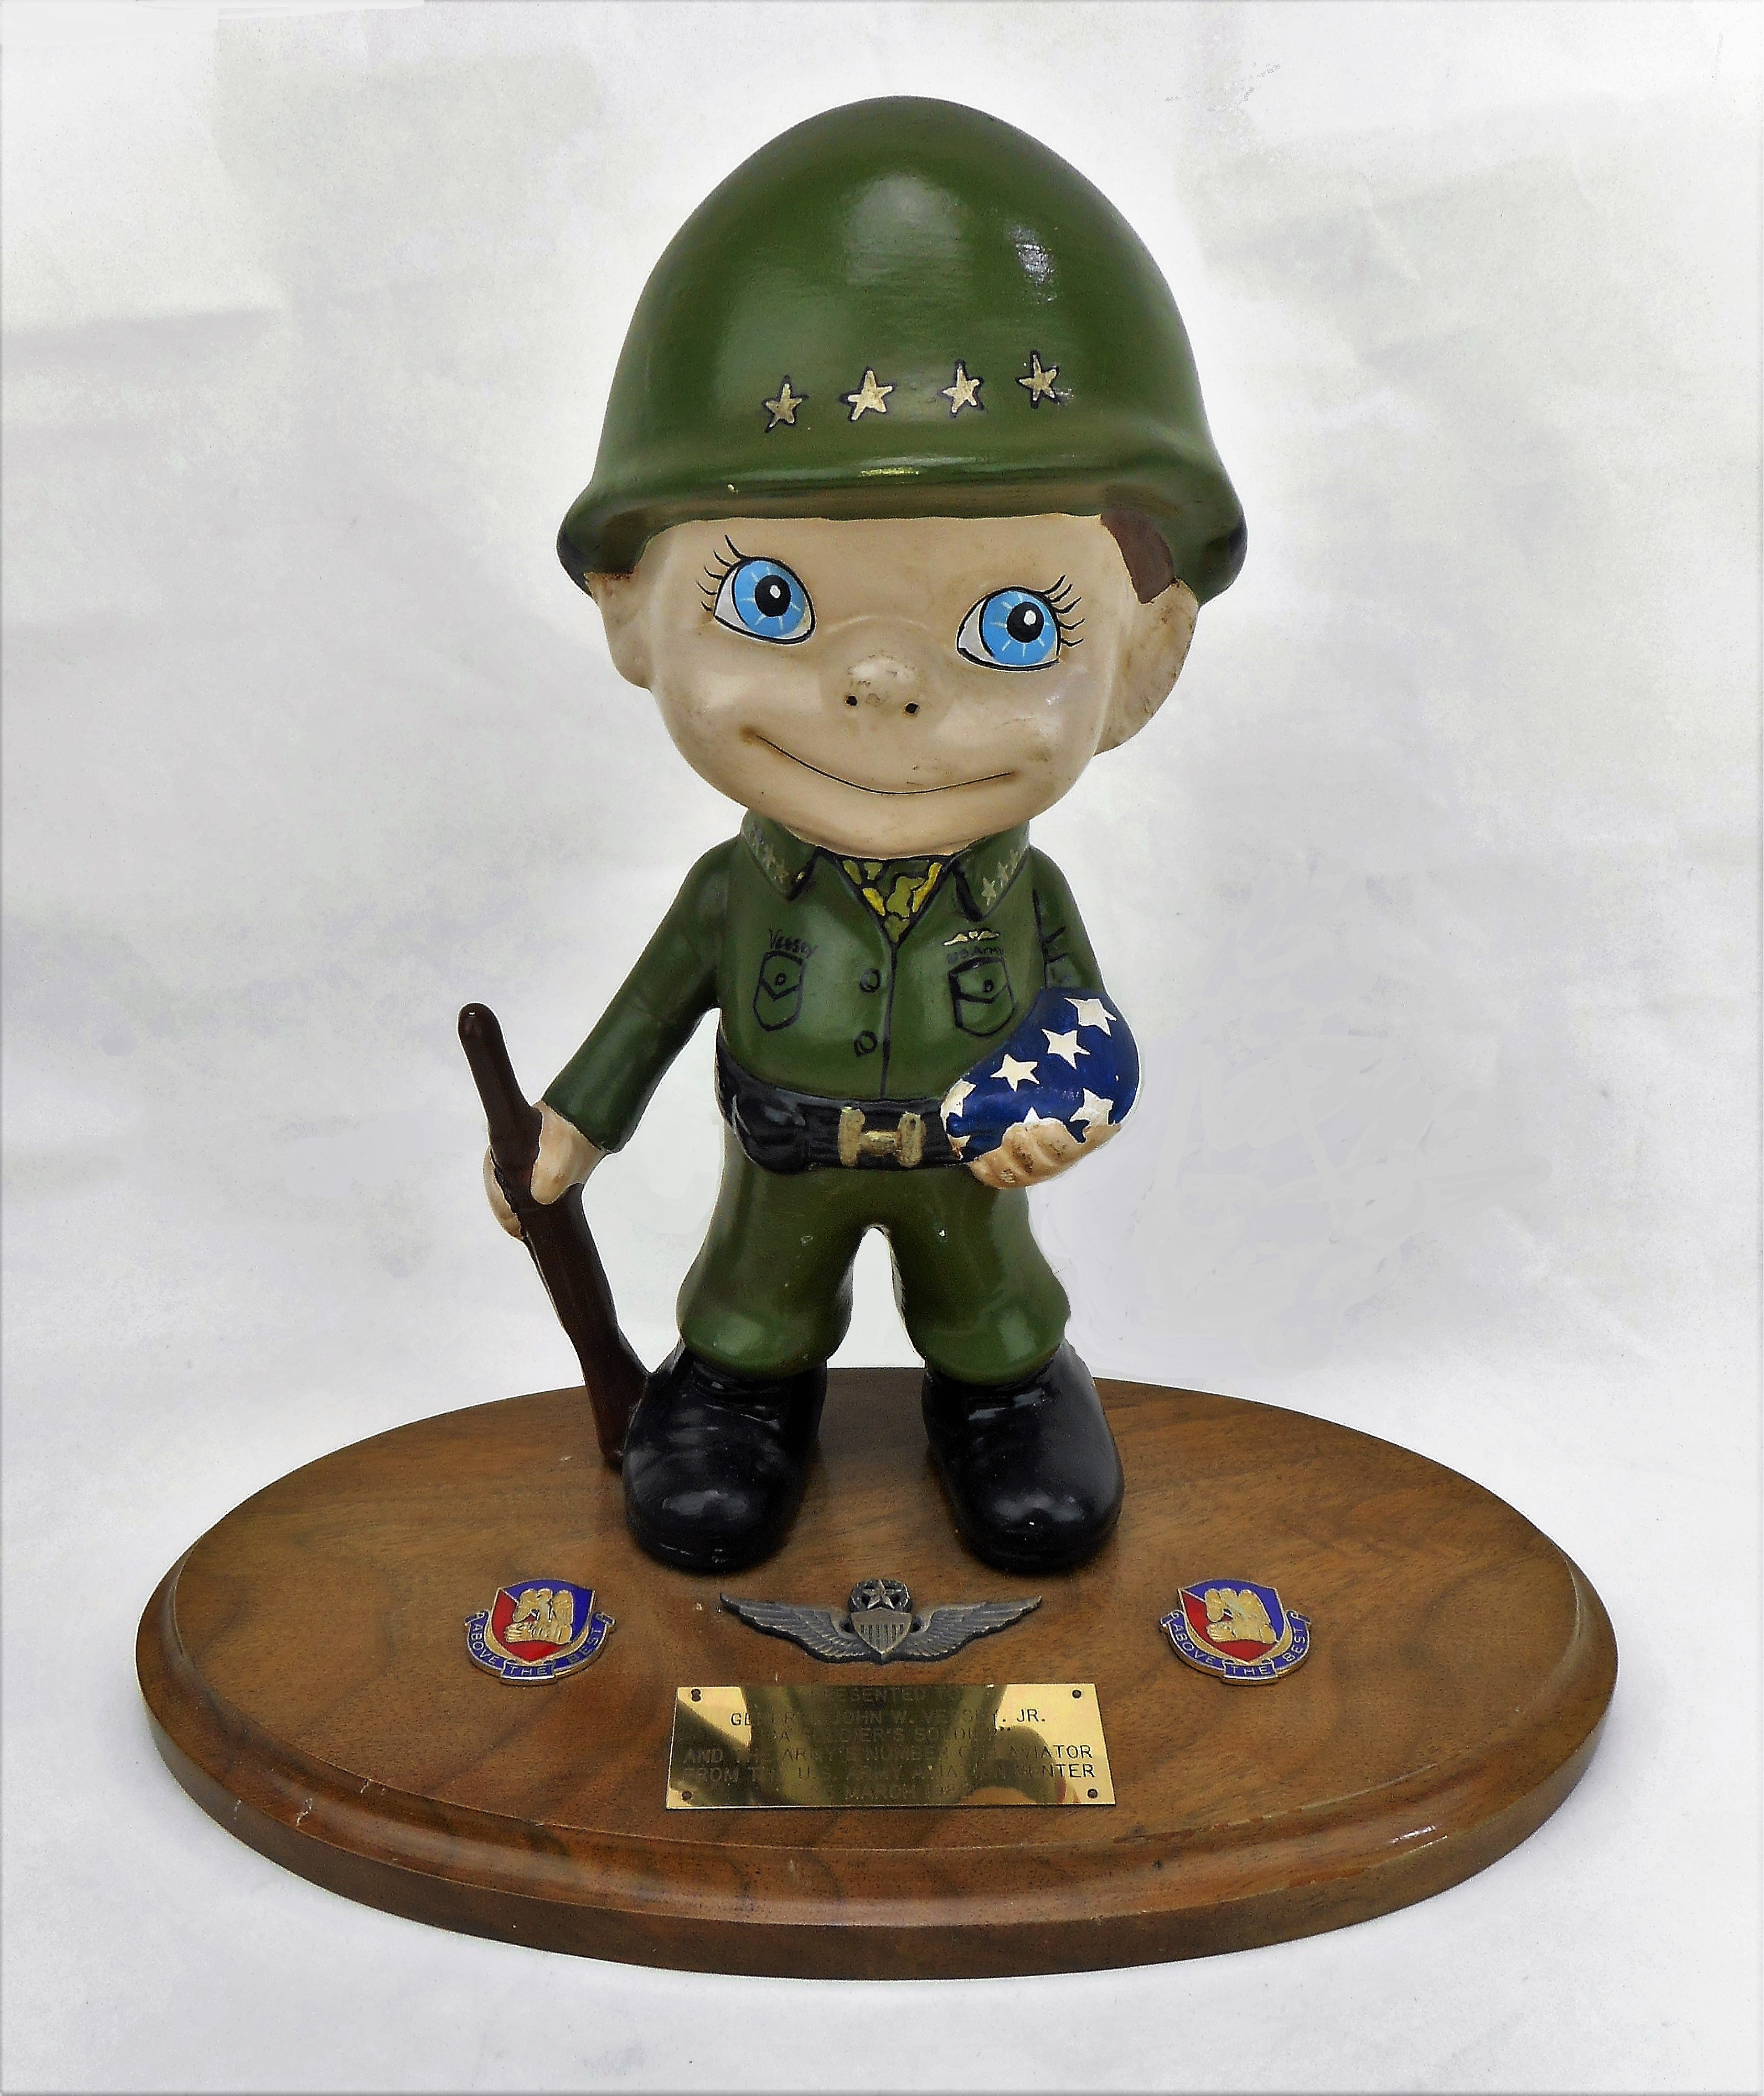 John Vessey figurine from Army Aviation Center, 25 March 1982